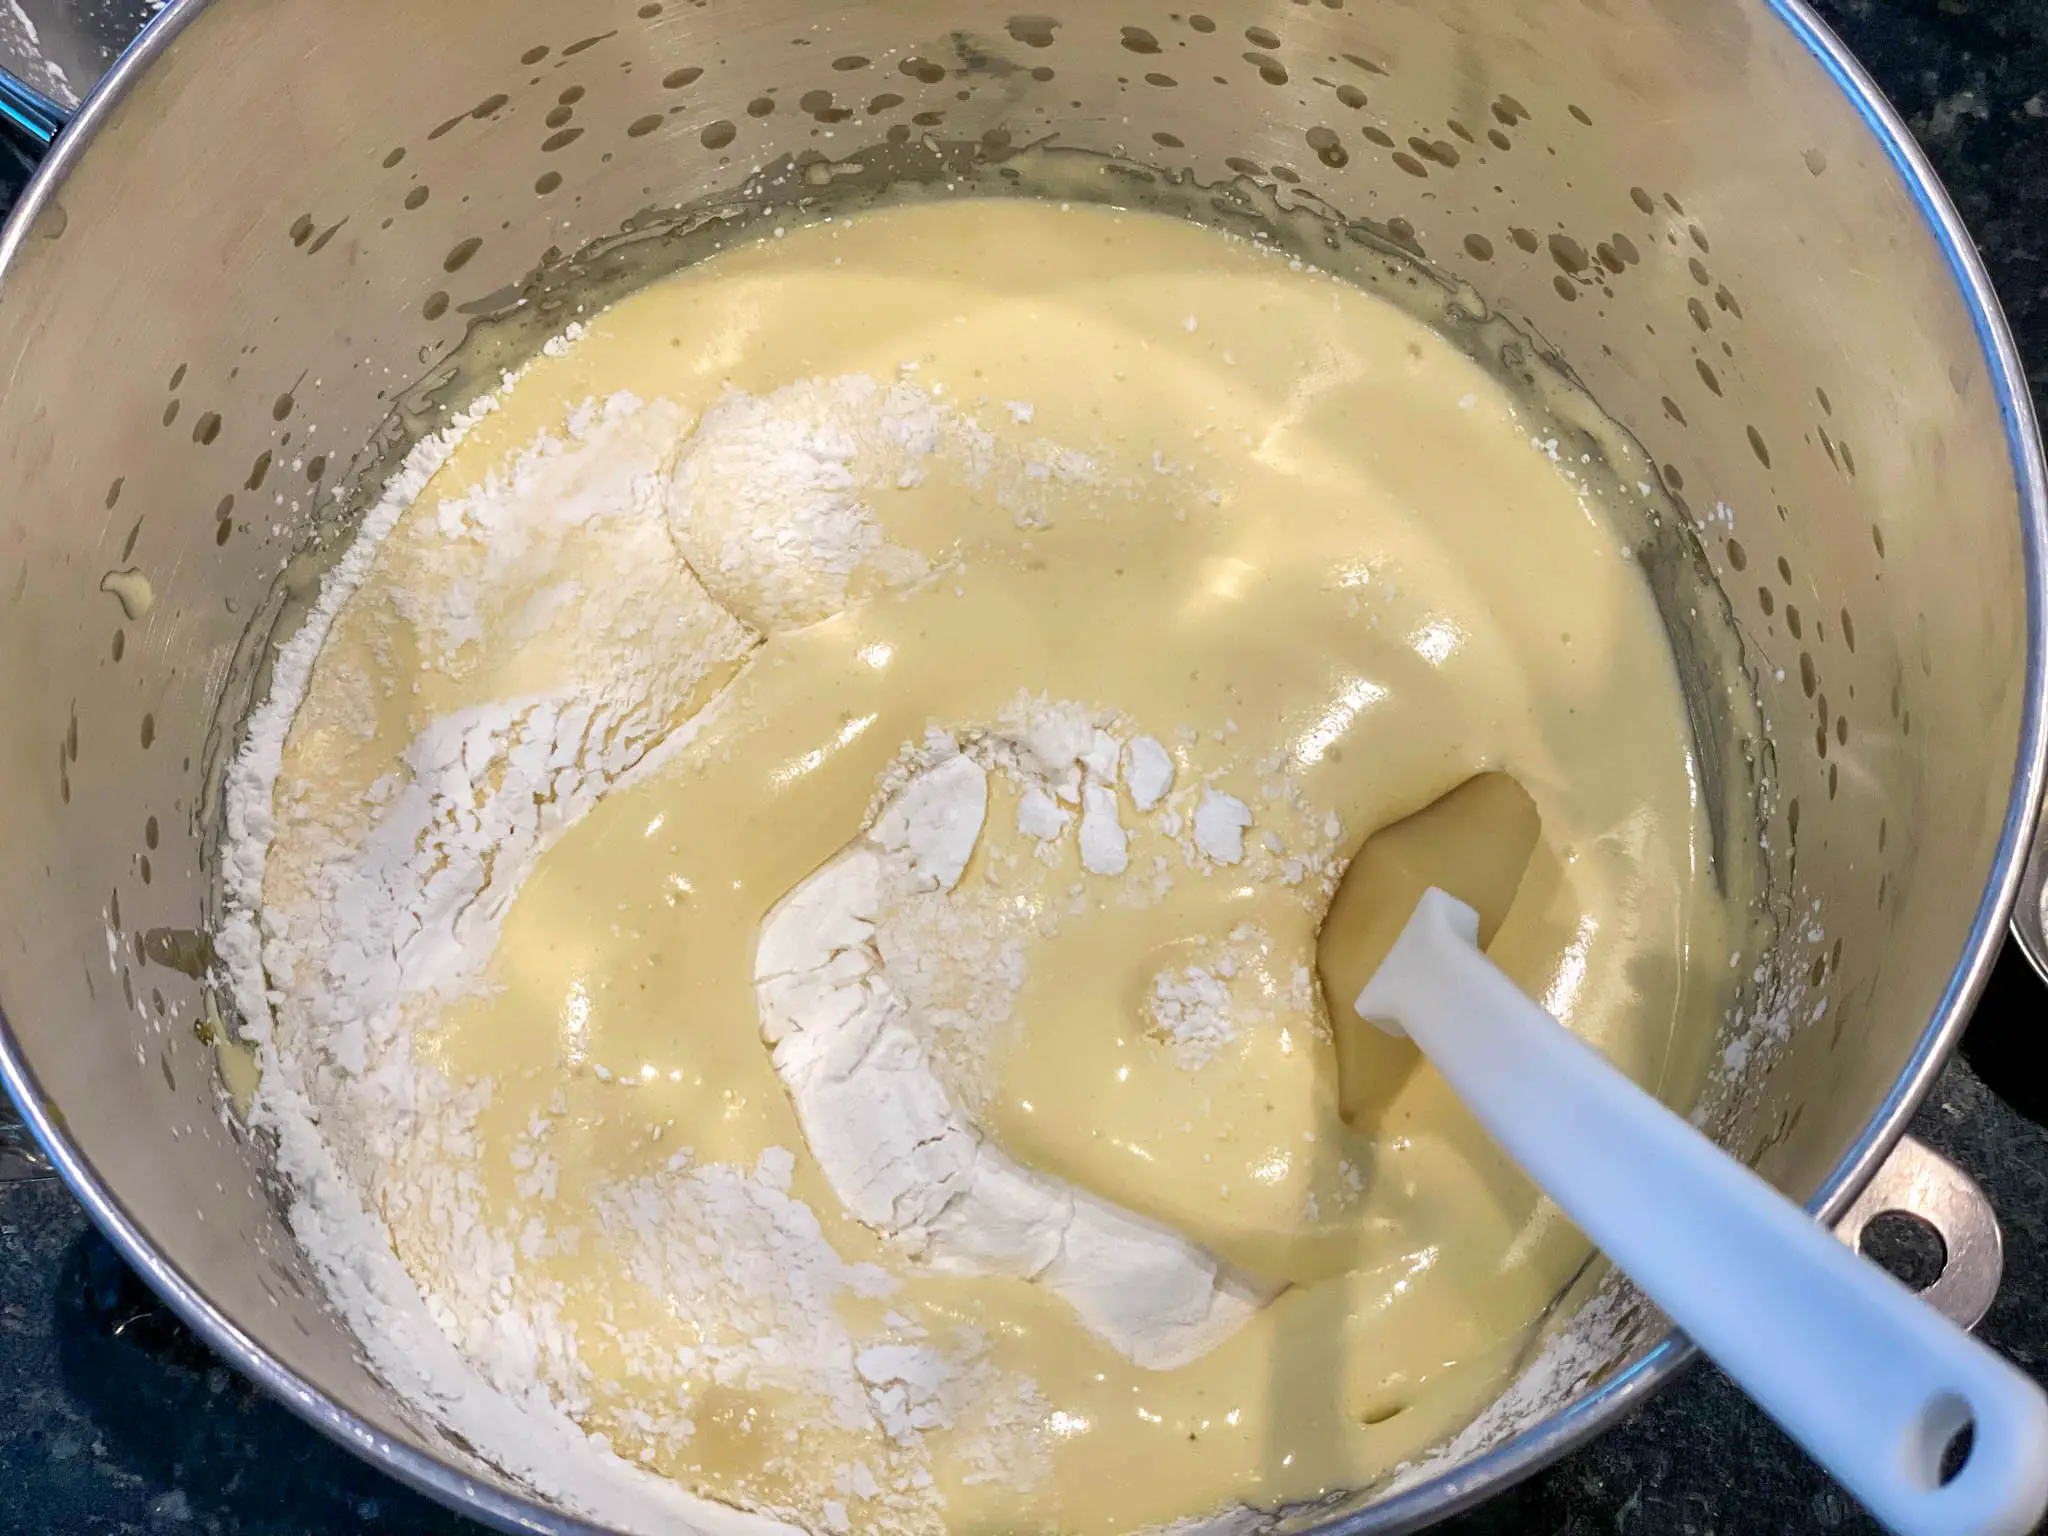 Folding dry ingredients into egg and sugar mixture.